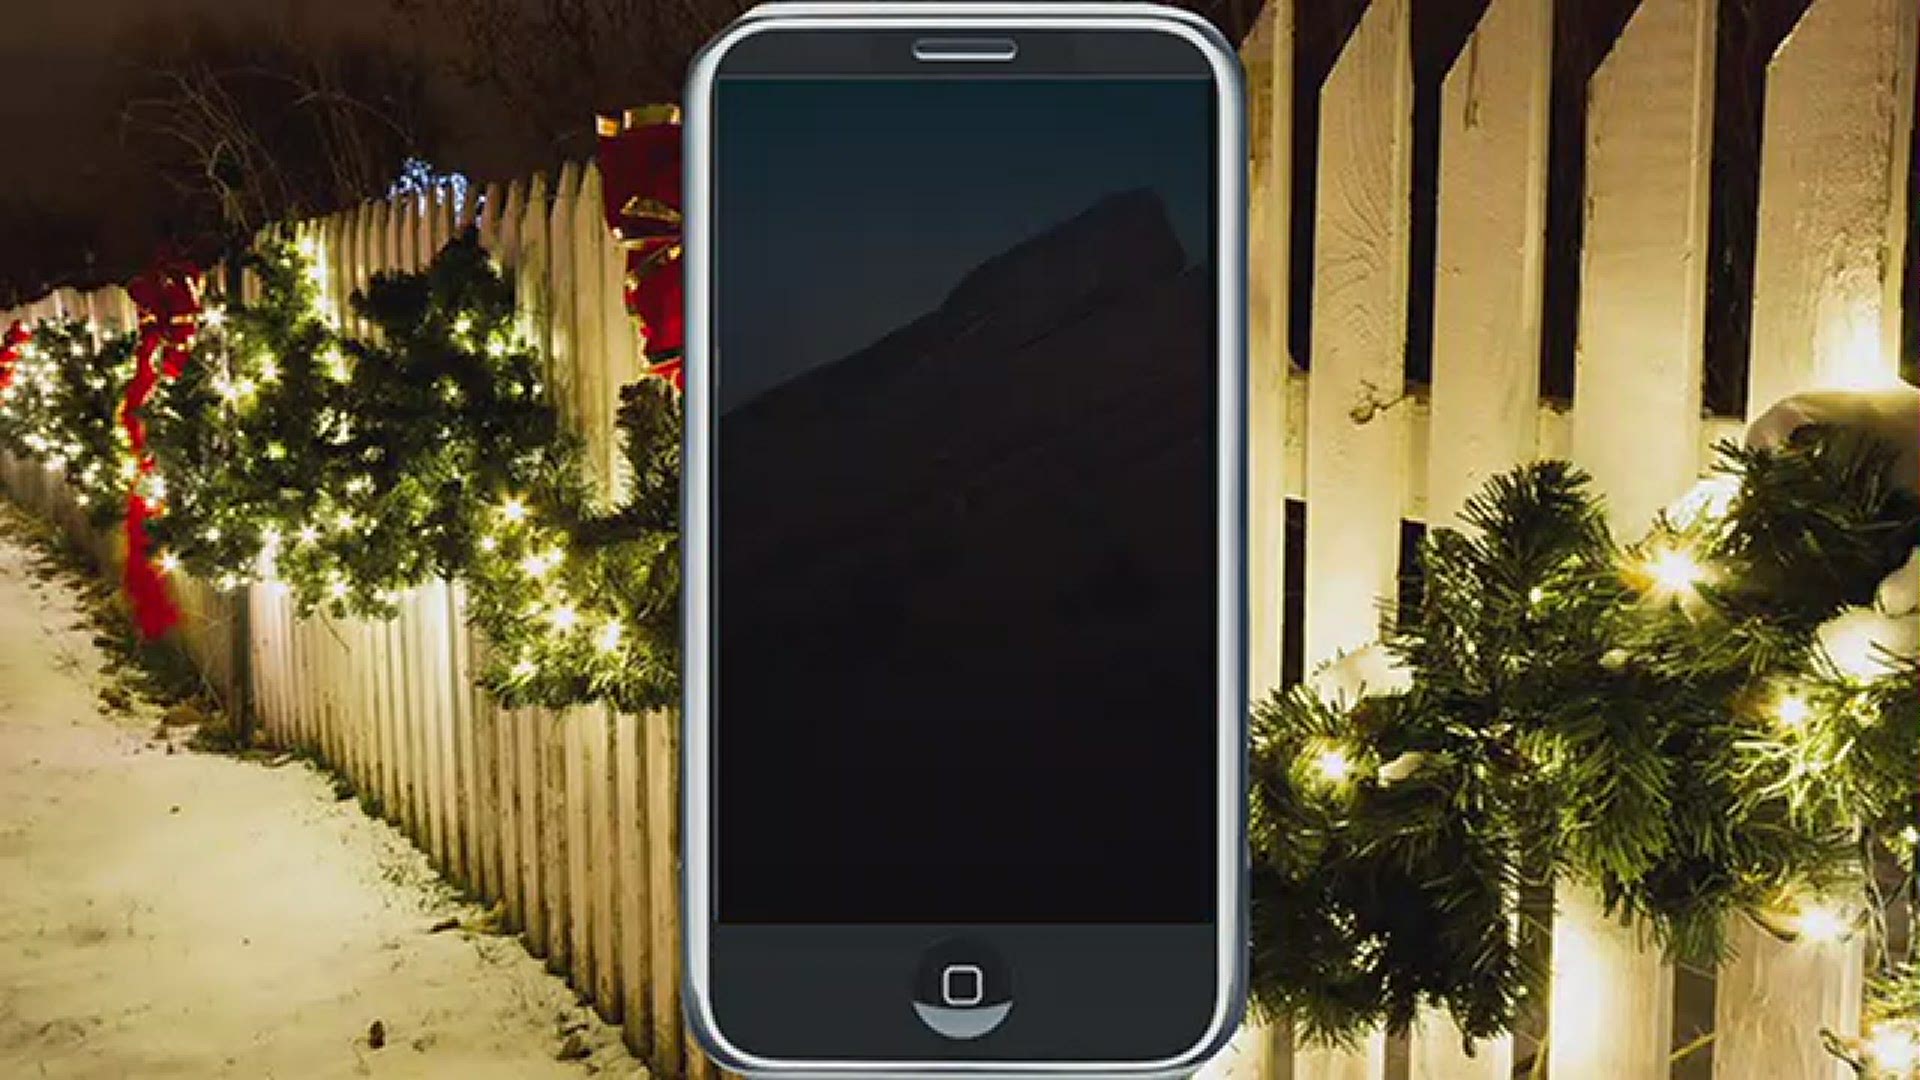 This phantom finger will show you how to use the "near me" section of the 9NEWS app to find amazing holiday lights.